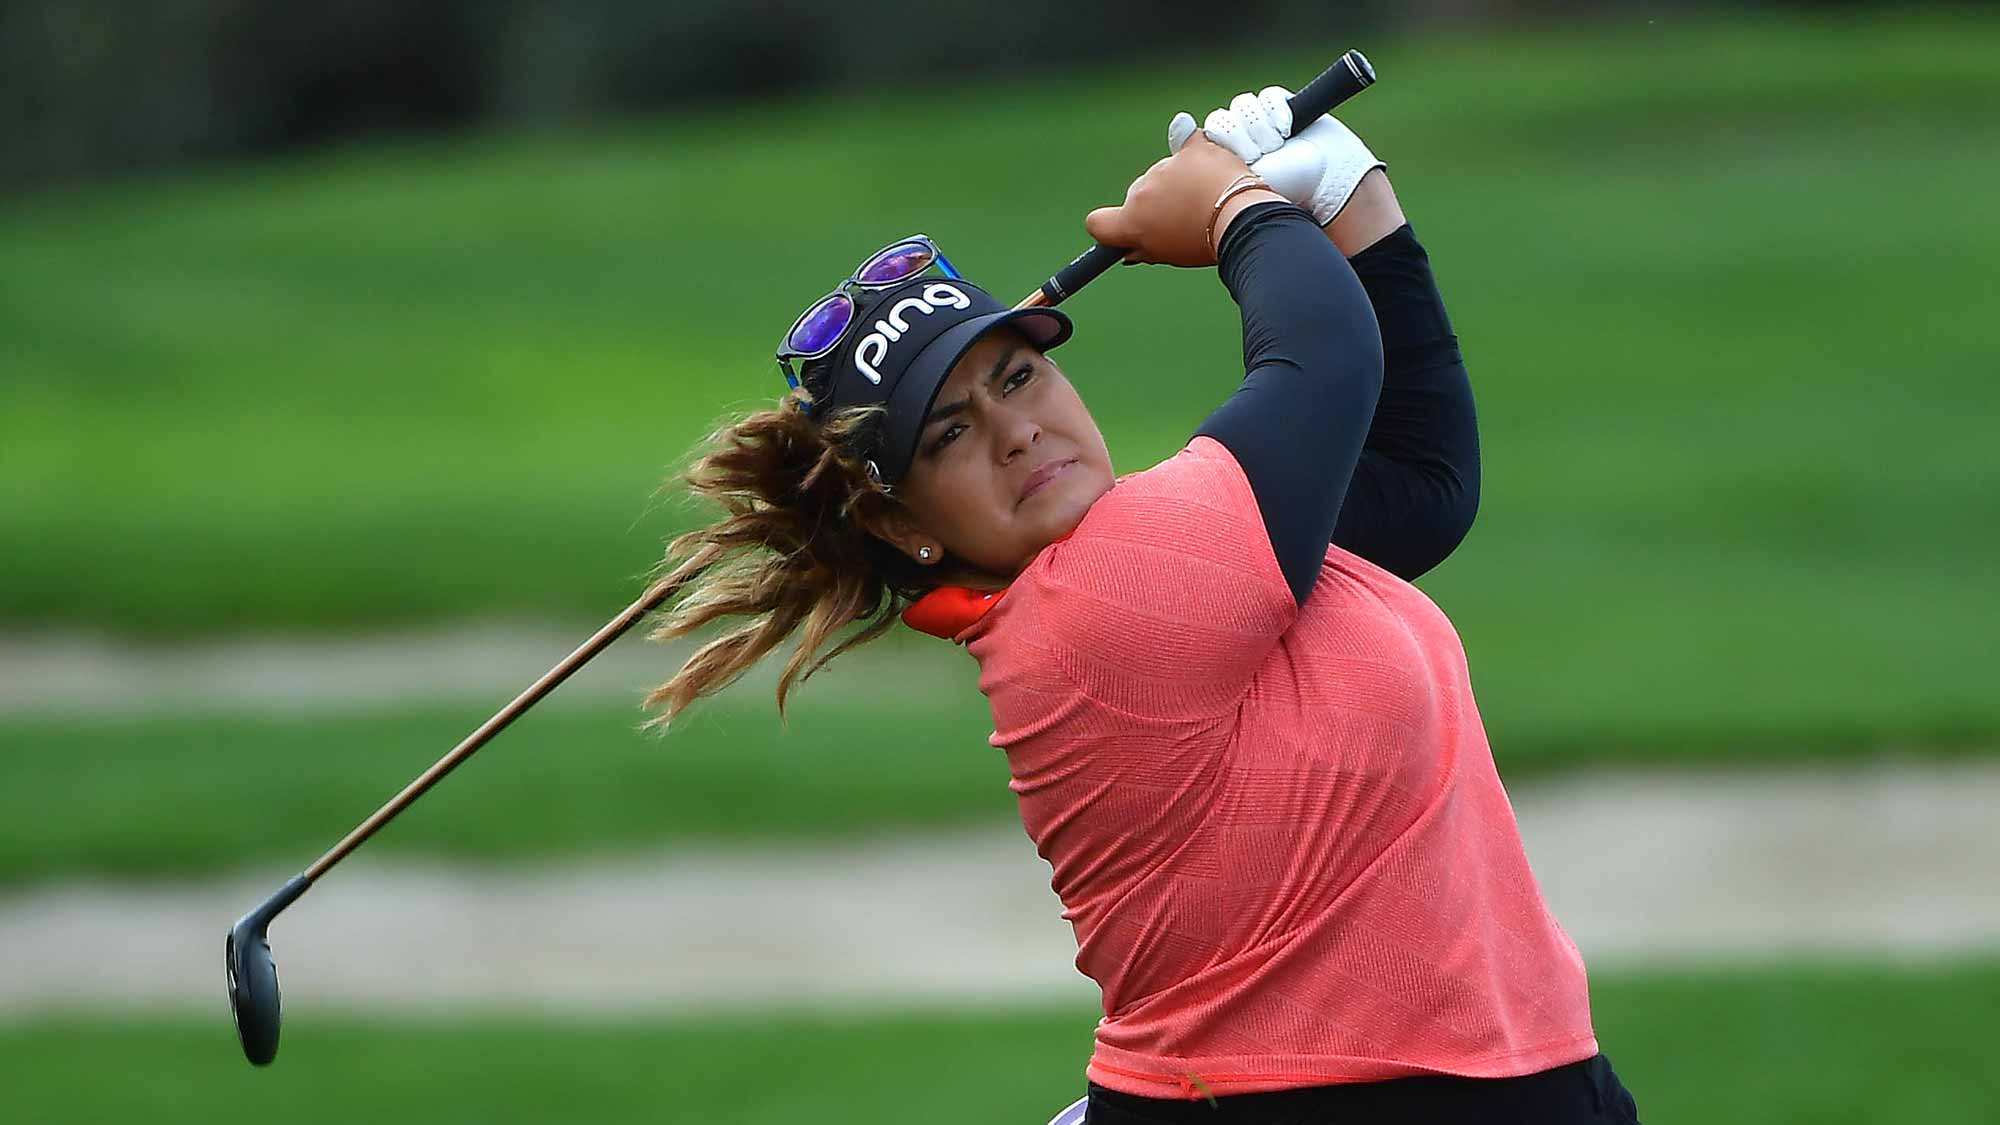 Lizette Salas hits out of the rough on the 10th fairway during Round Two of the LPGA KIA CLASSIC at the Park Hyatt Aviara golf course on March 23, 2018 in Carlsbad, California